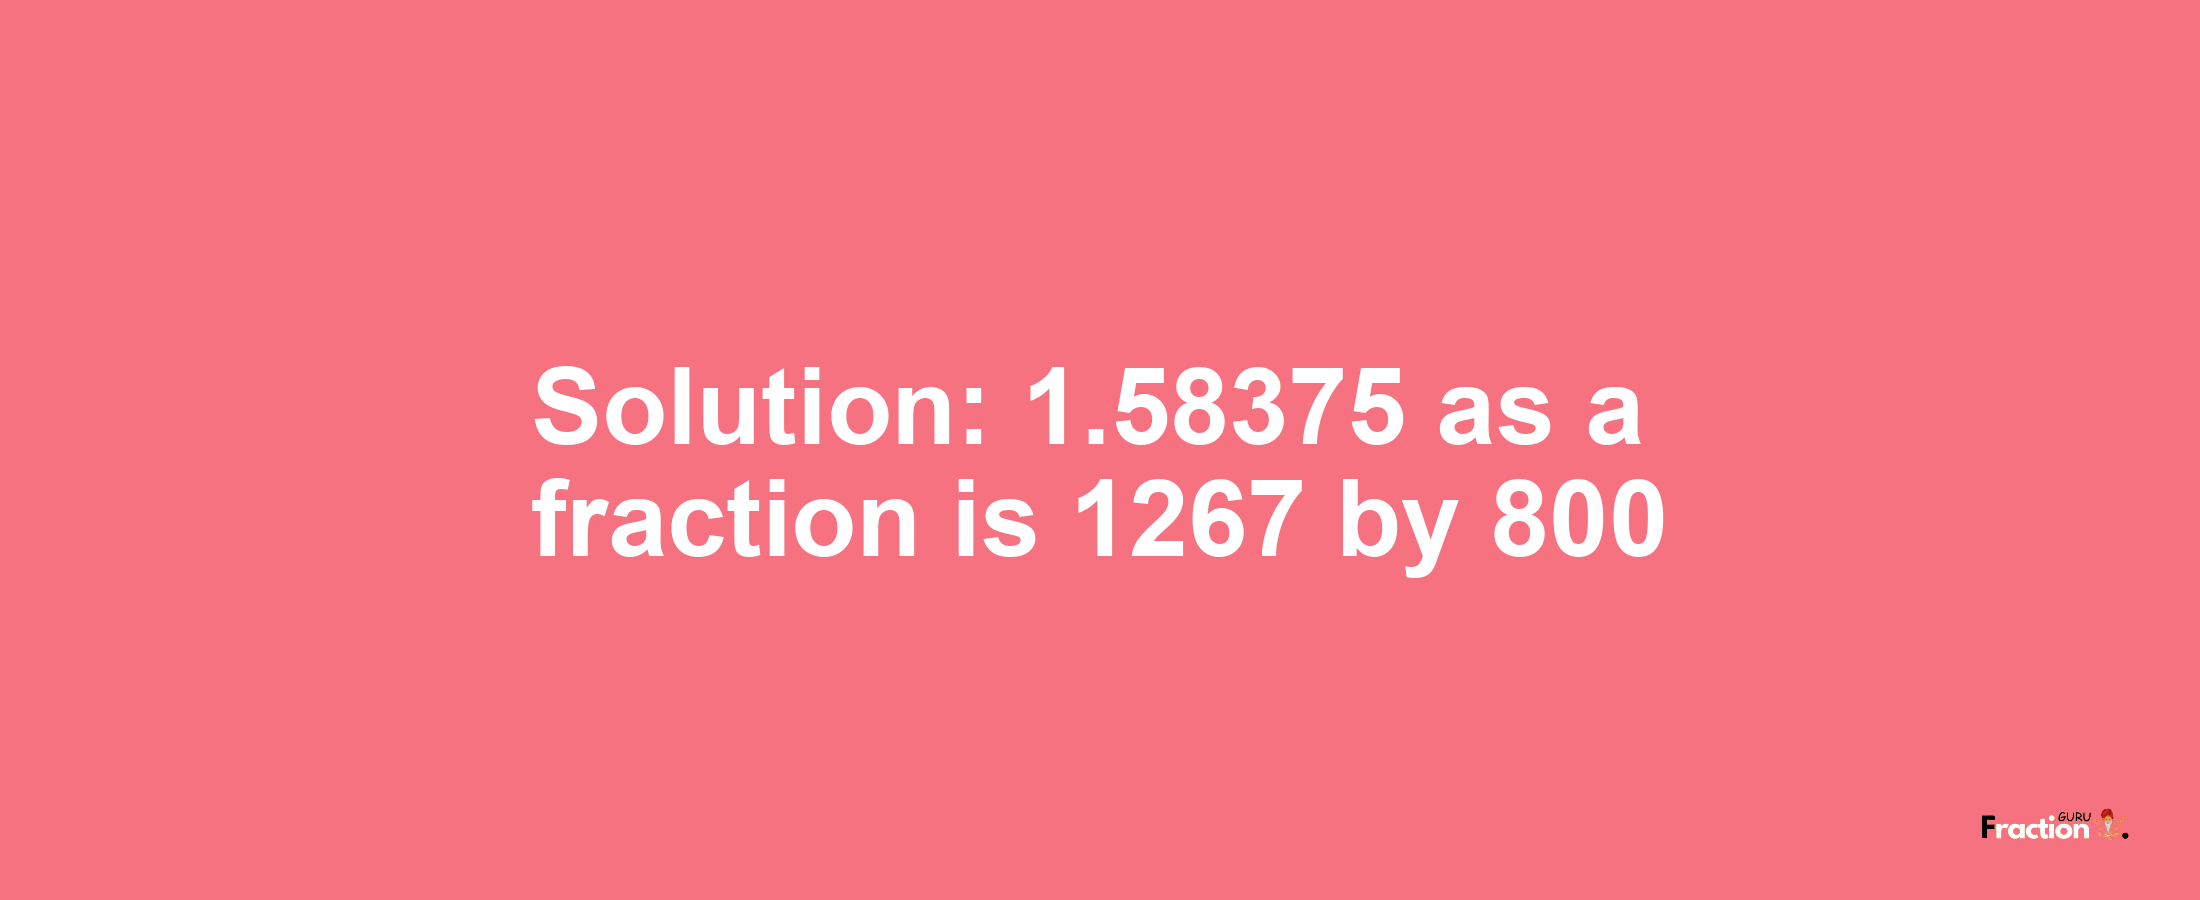 Solution:1.58375 as a fraction is 1267/800